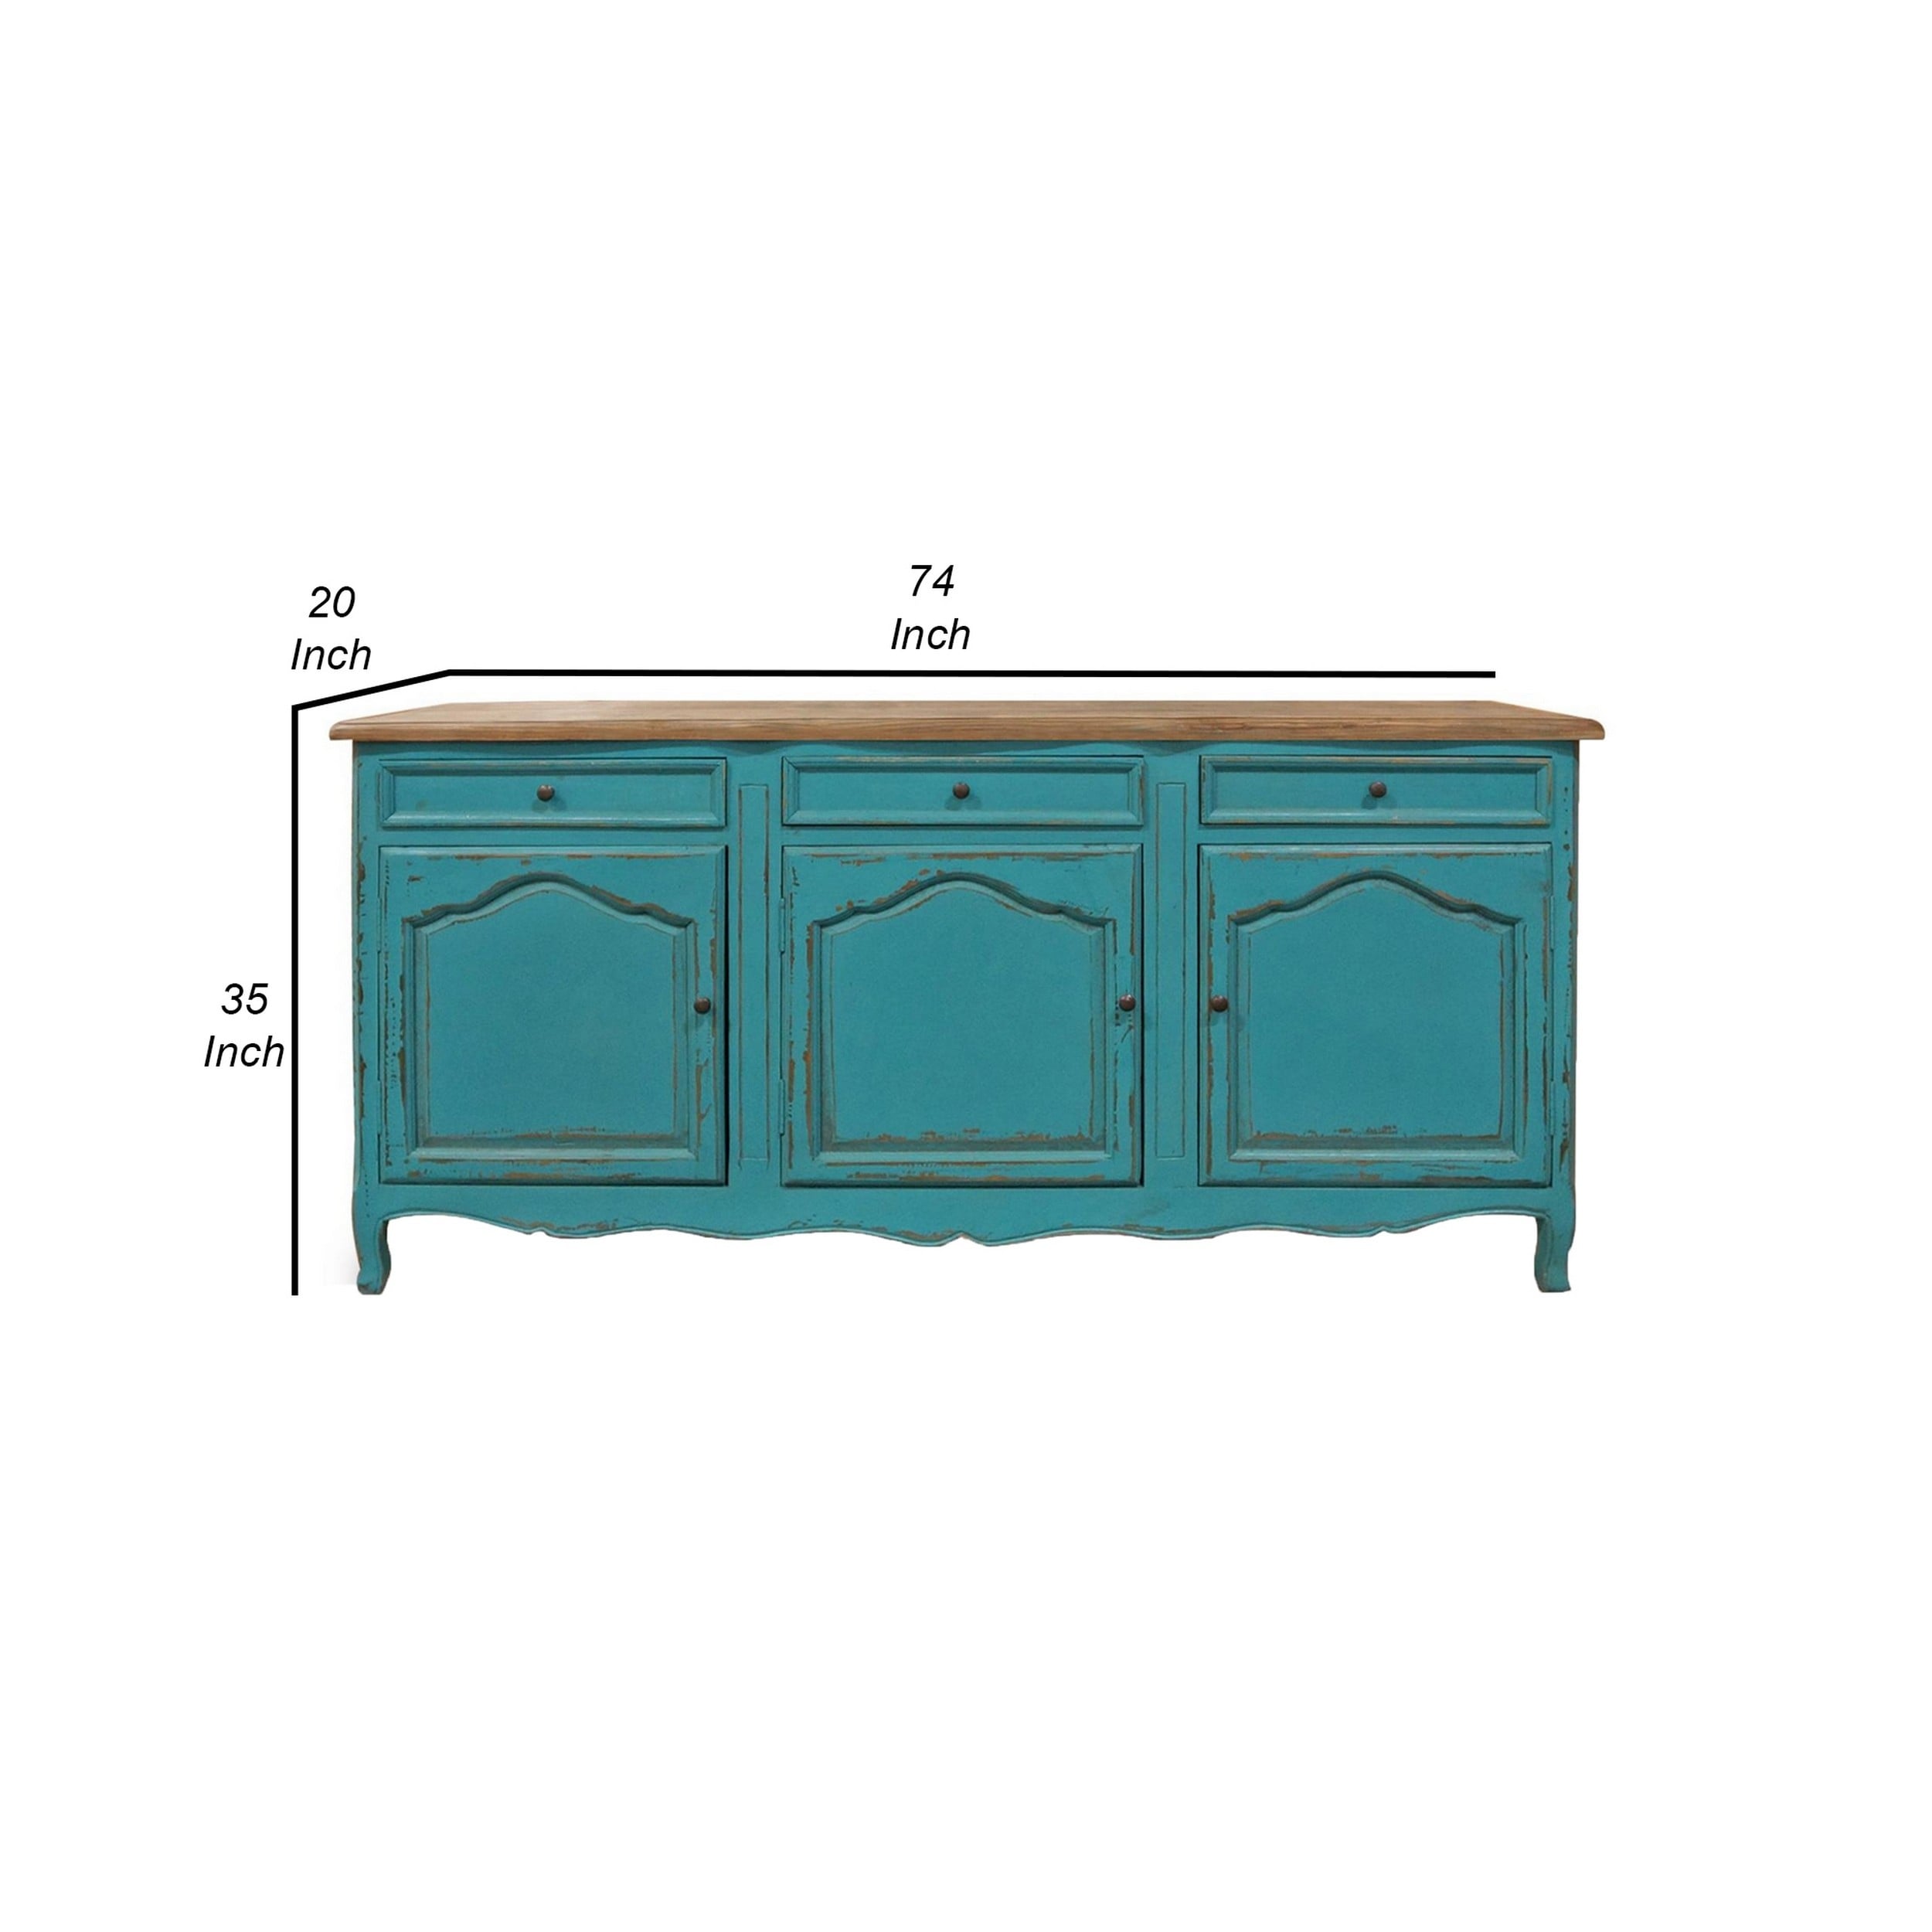 74 Inch Sideboard Buffet Cabinet, 3 Doors and Drawers, Painted Teal Finish